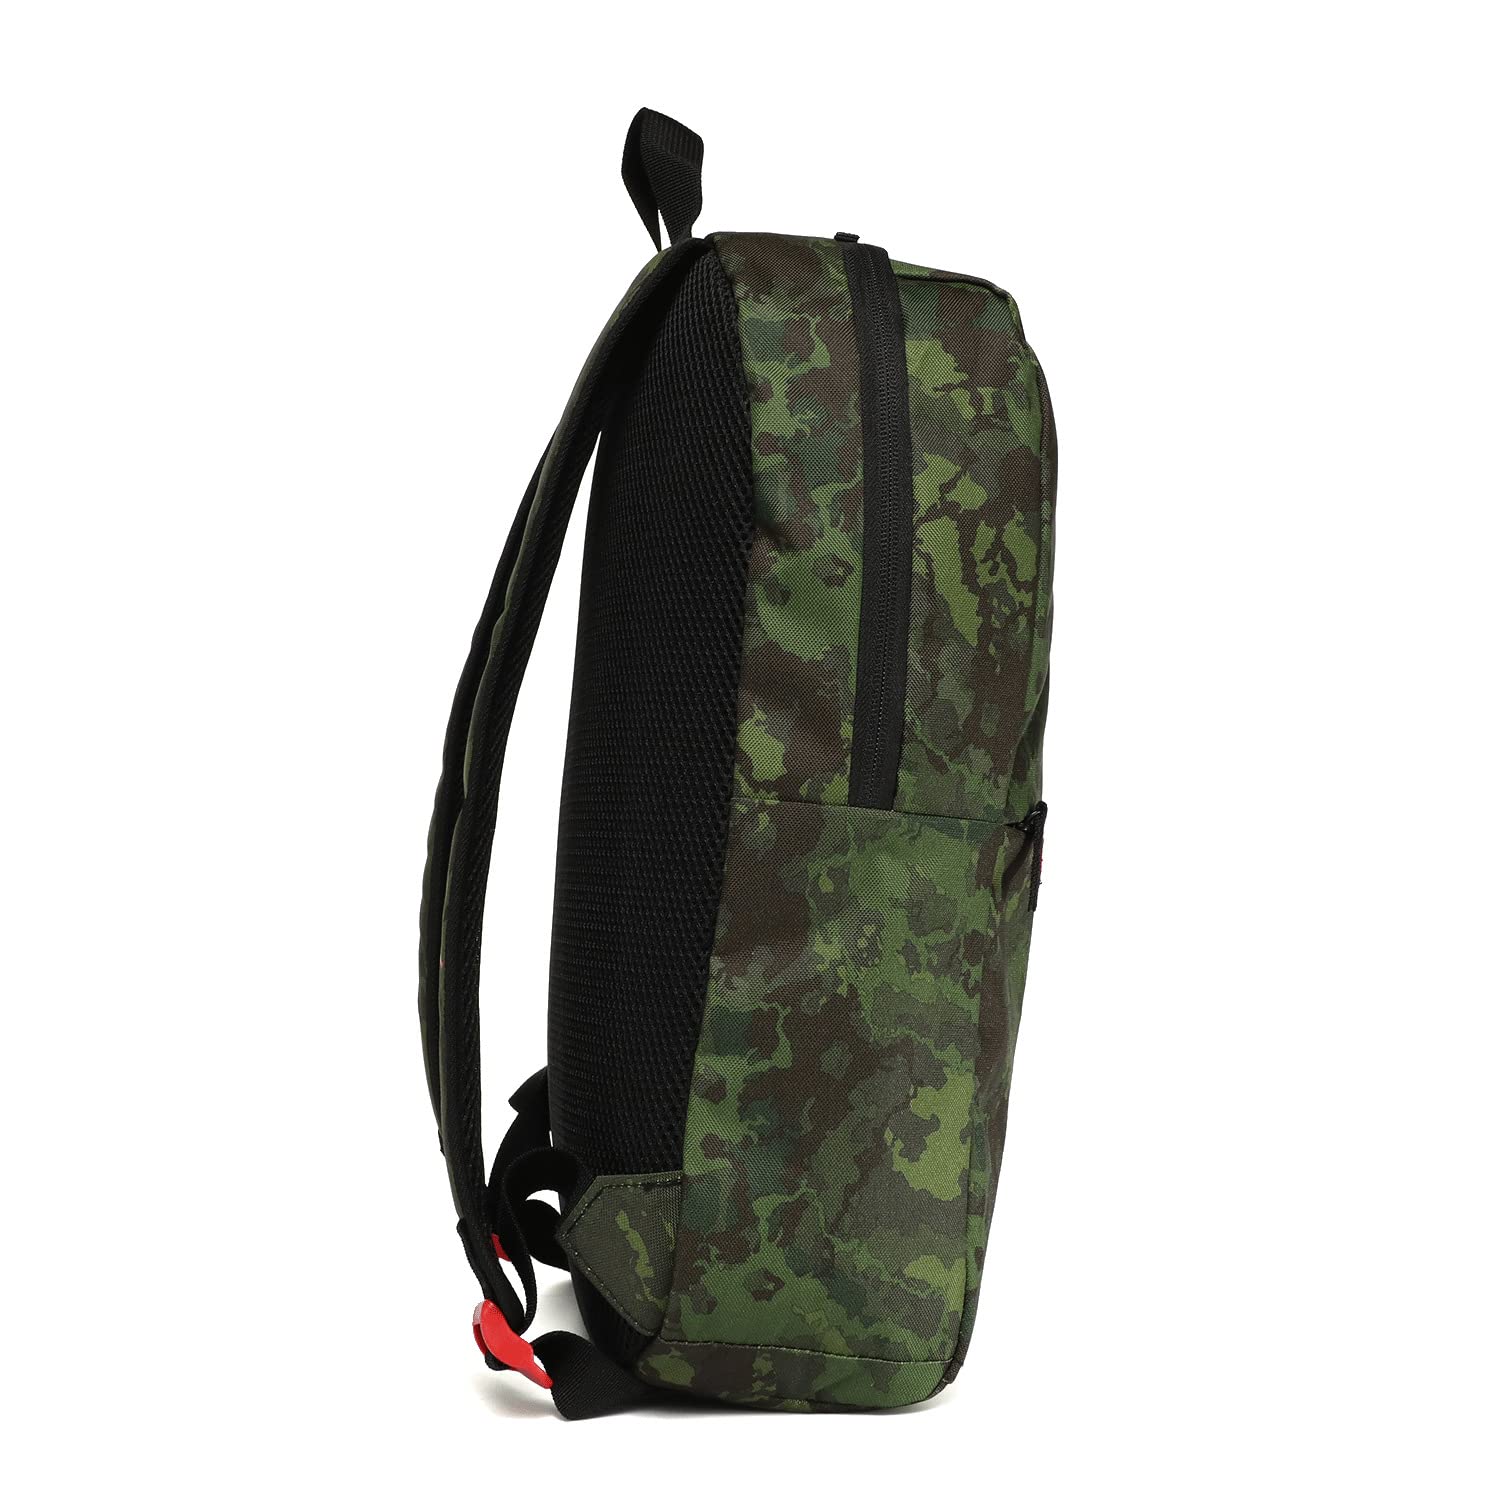 Image 5 of Zion Essentials Backpack